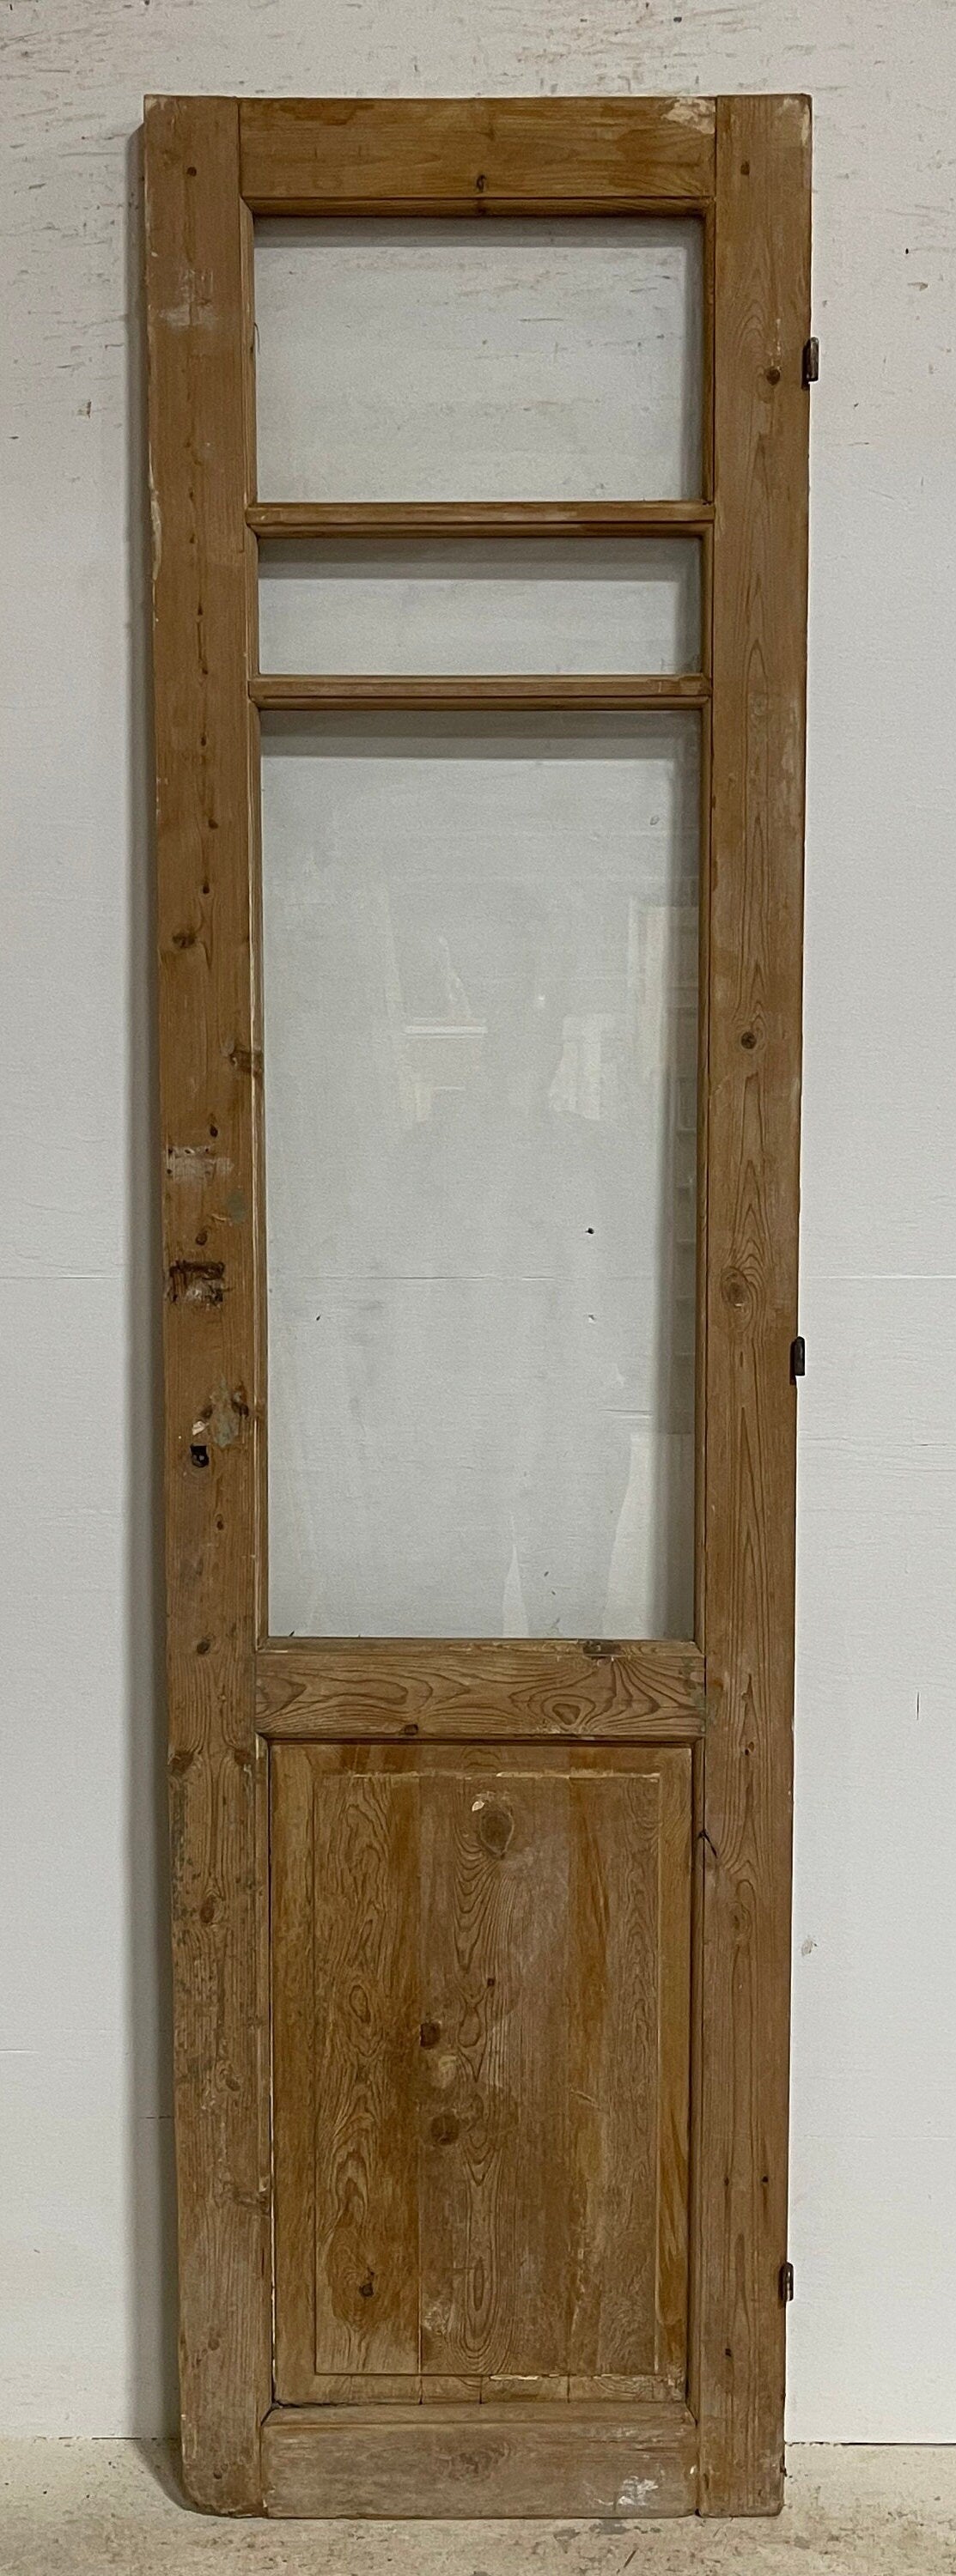 Antique French panel door with glass (90.25x23.75) G1473s